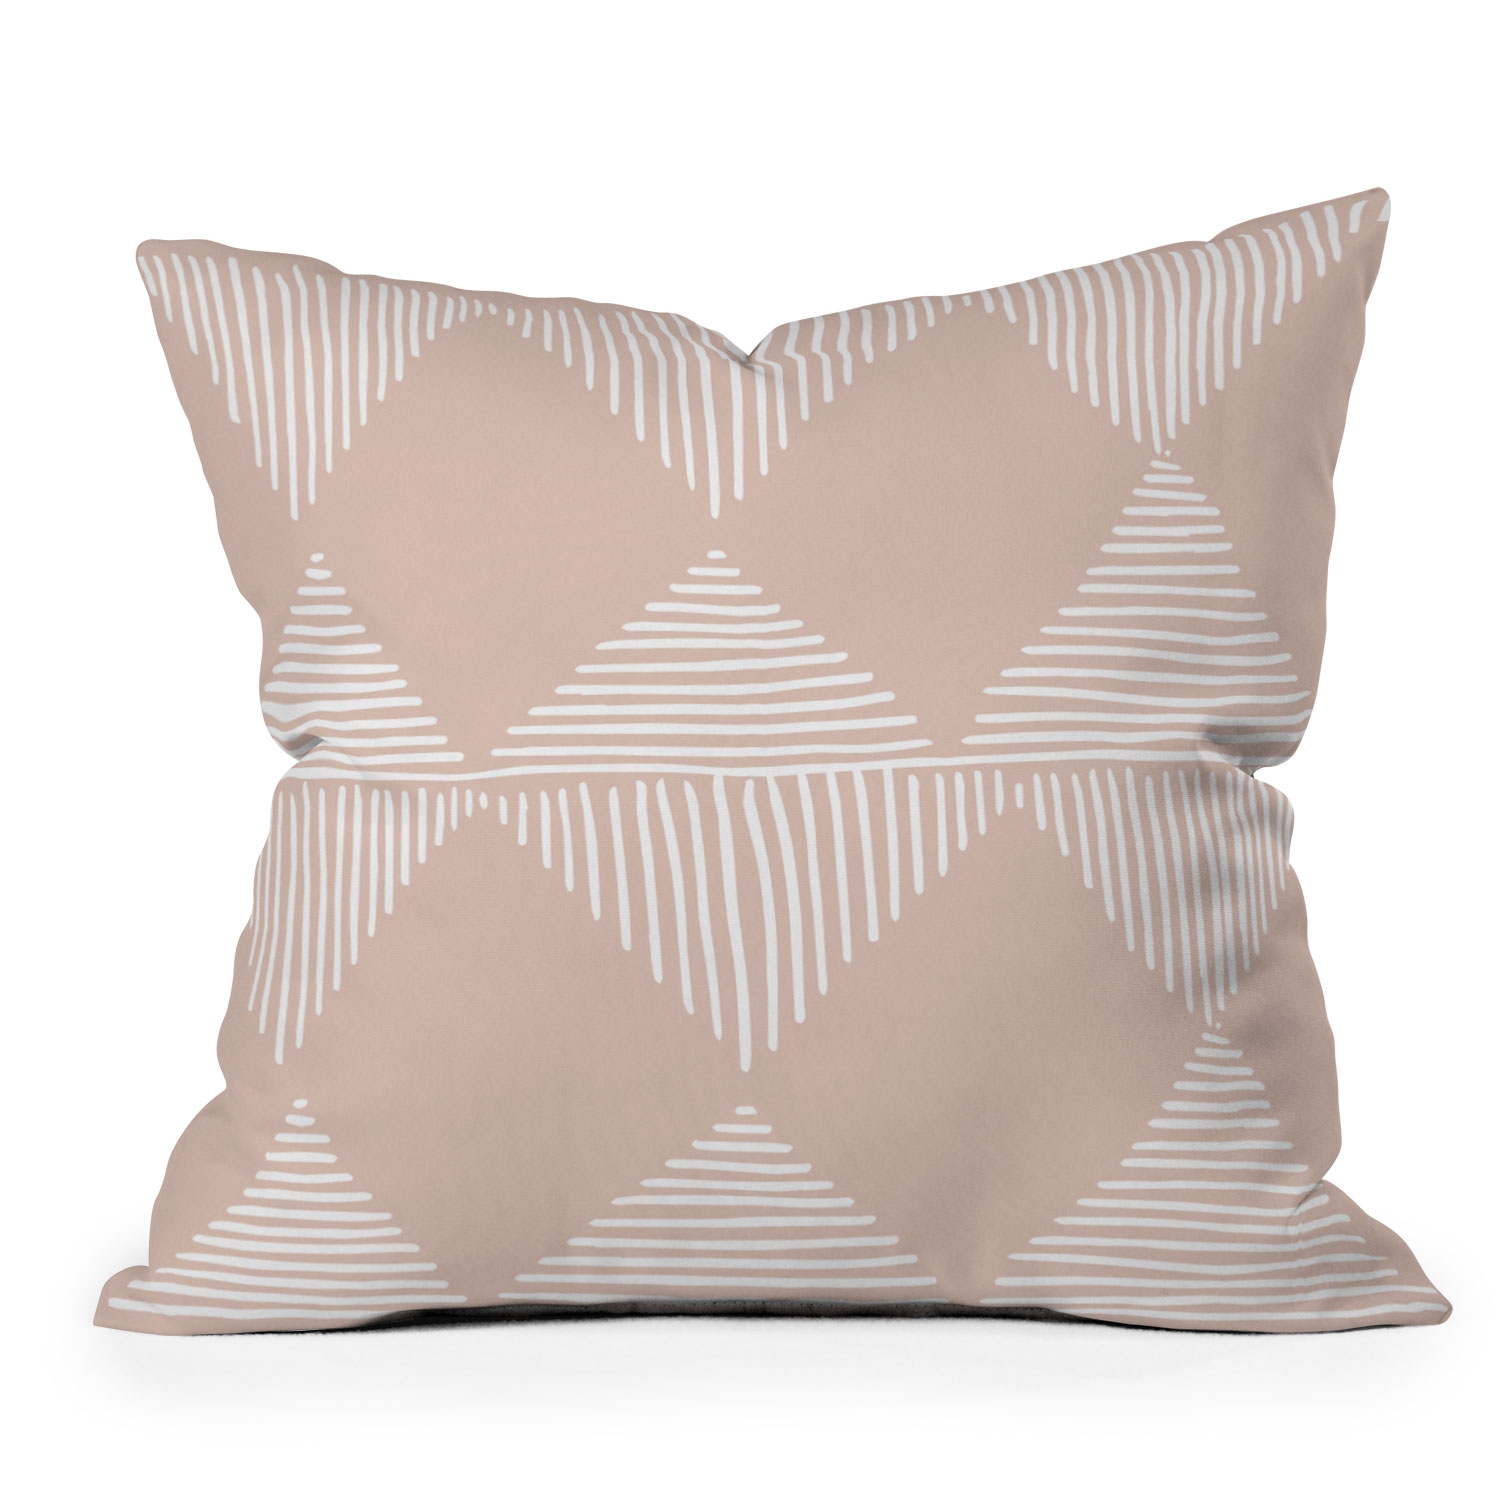 Sketches 2 by Mareike Boehmer - Outdoor Throw Pillow 16" x 16" - Image 0